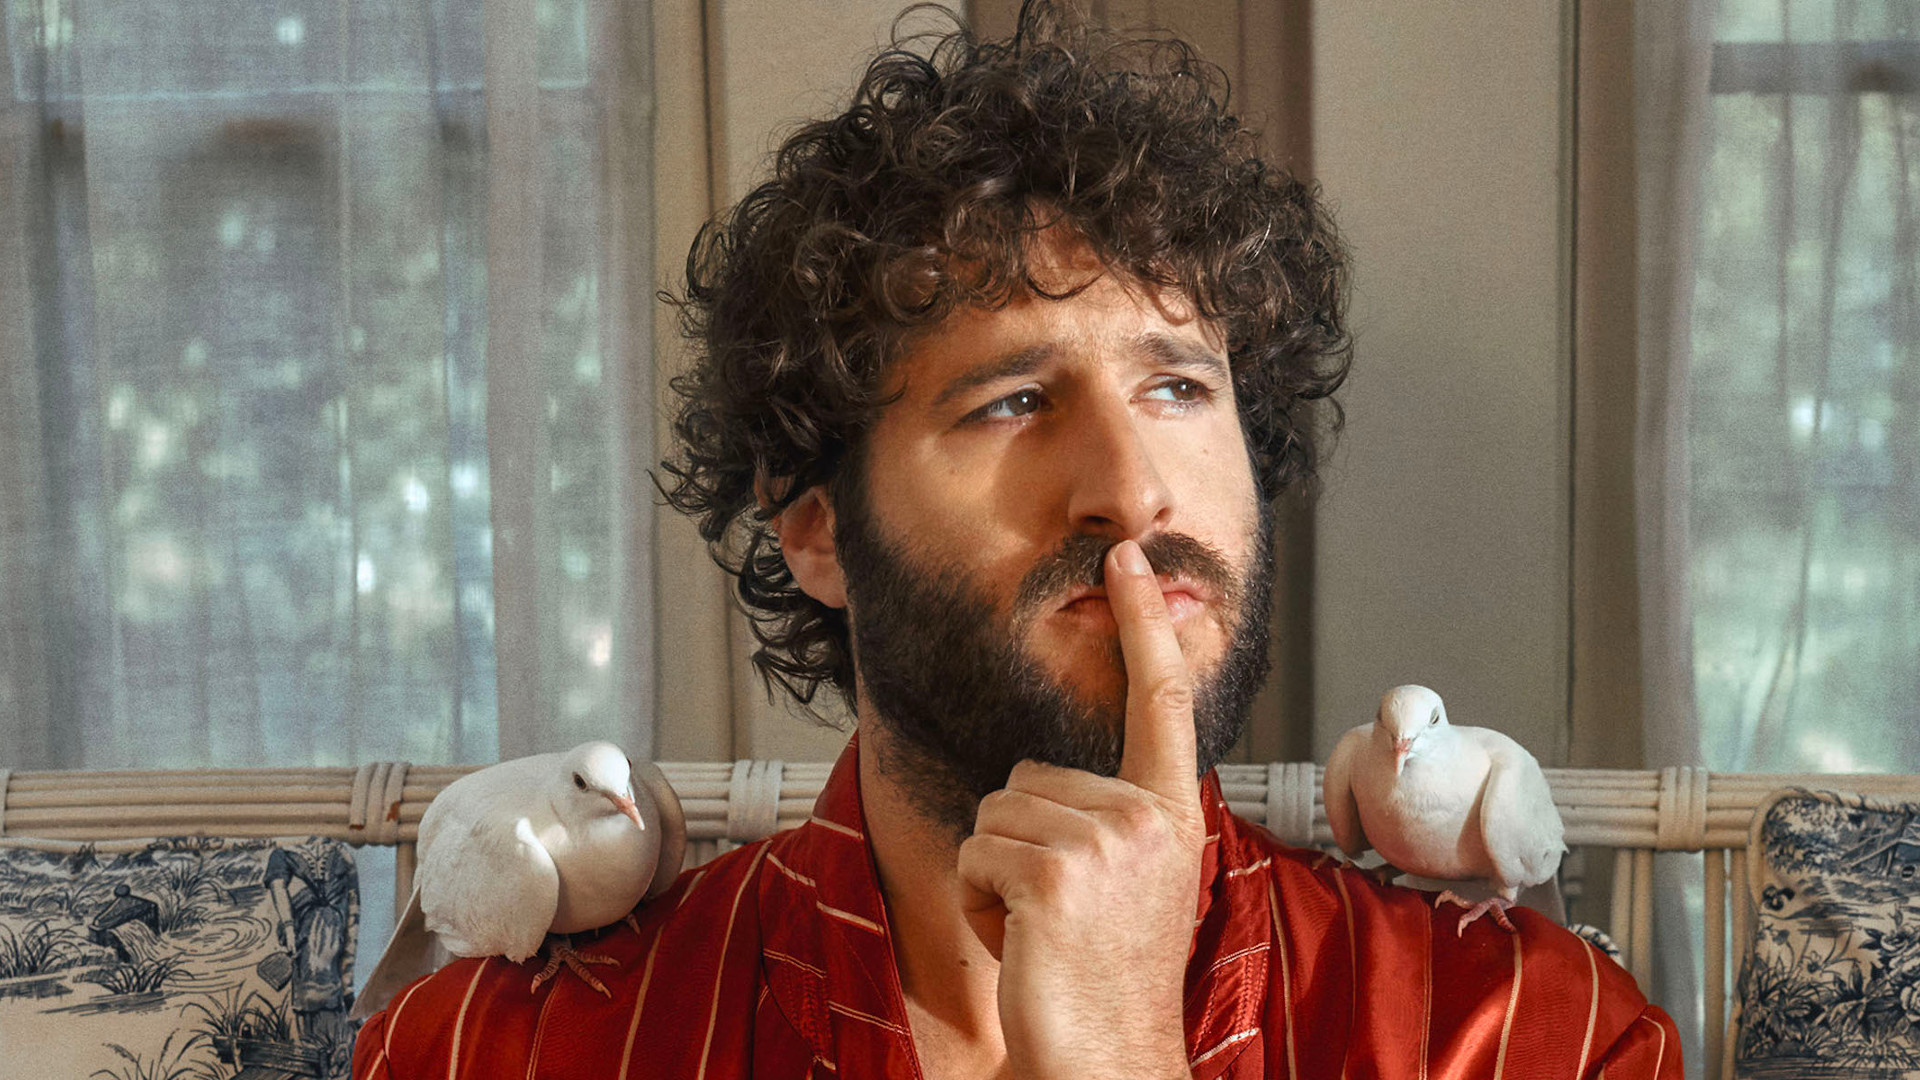 lil dicky professional rapper total sales